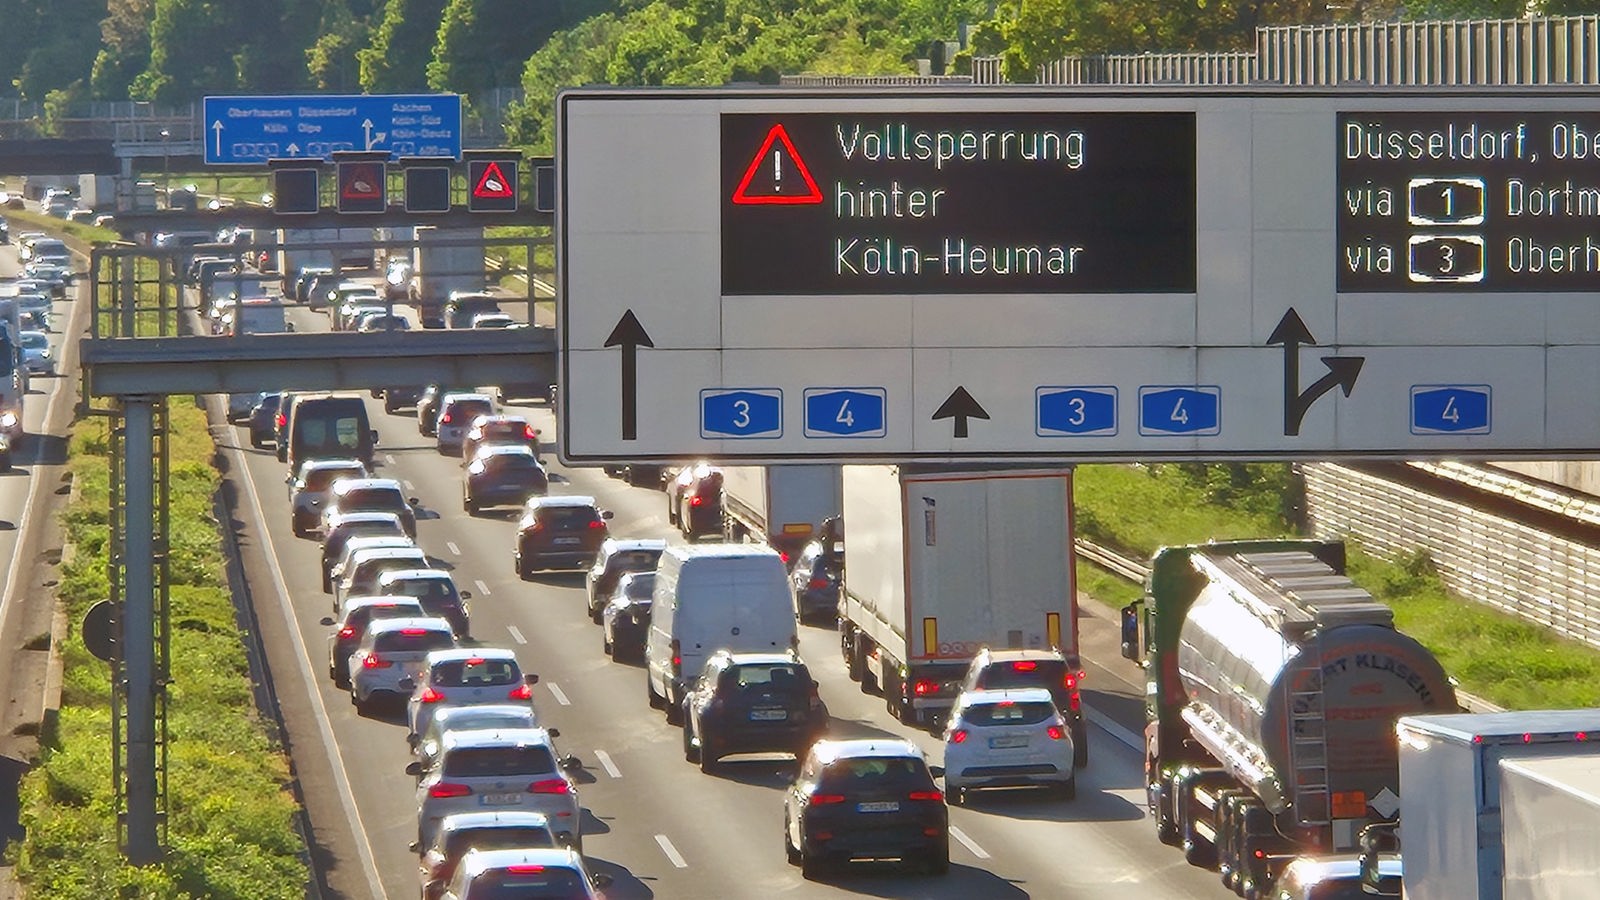 After bomb discovery: Cologne-Heumar motorway triangle free again – Westphalia-Lippe – News